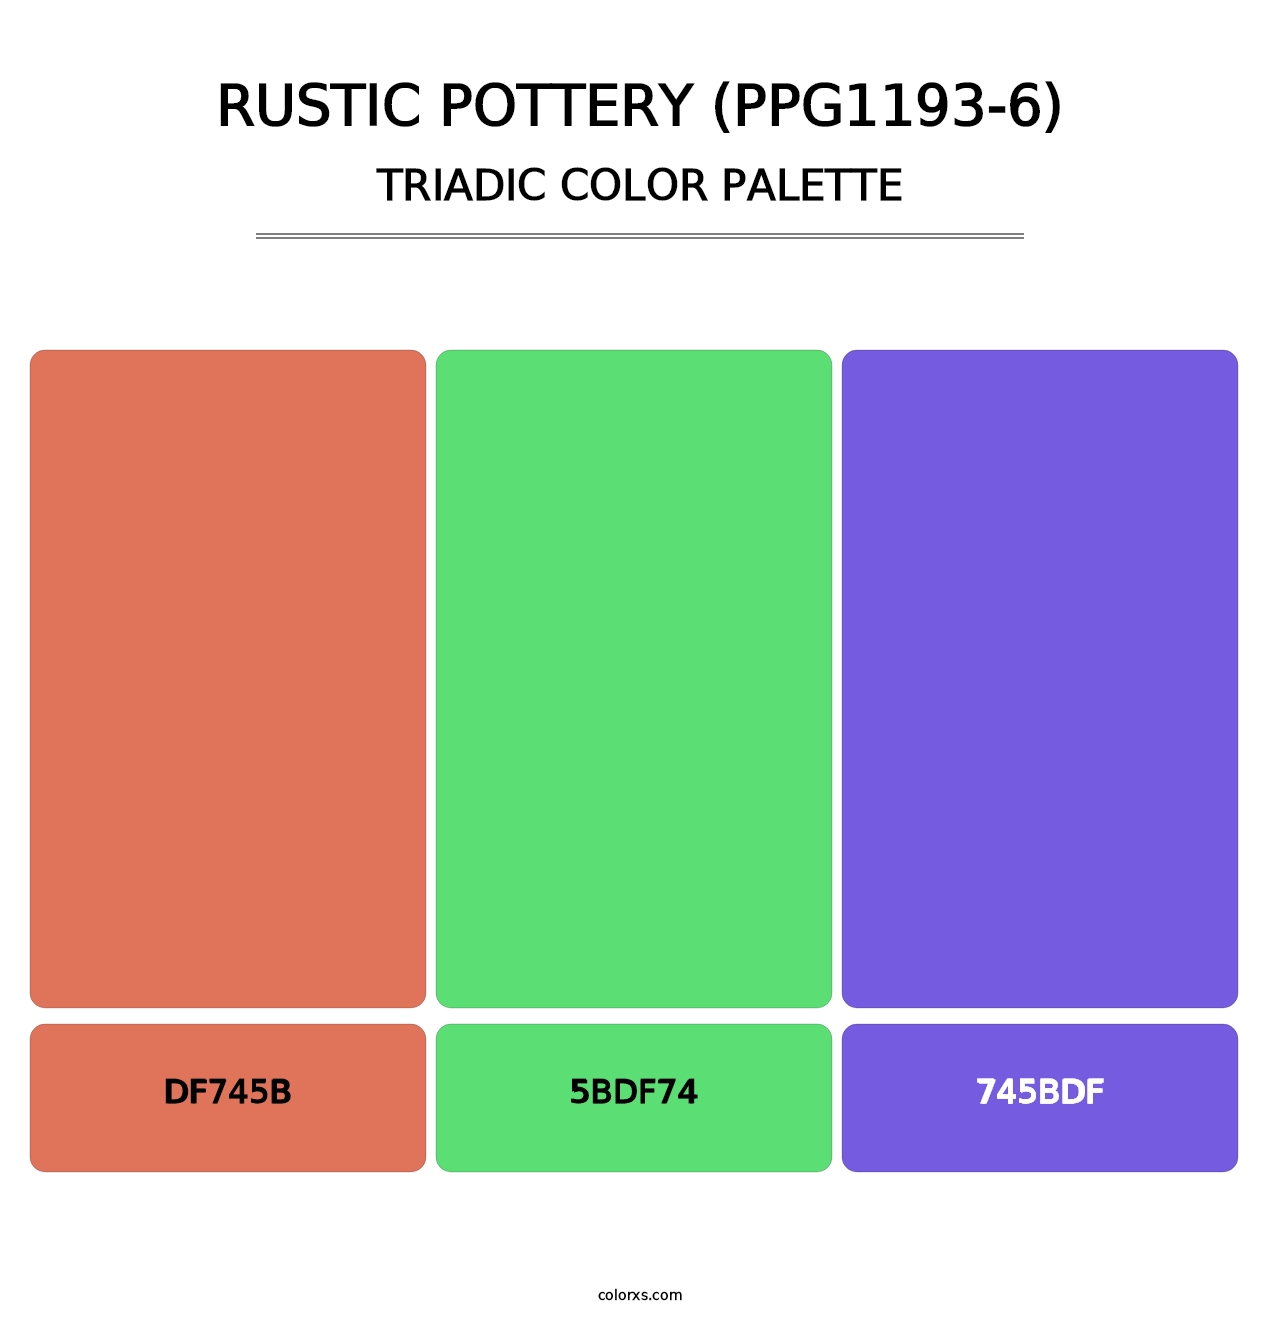 Rustic Pottery (PPG1193-6) - Triadic Color Palette